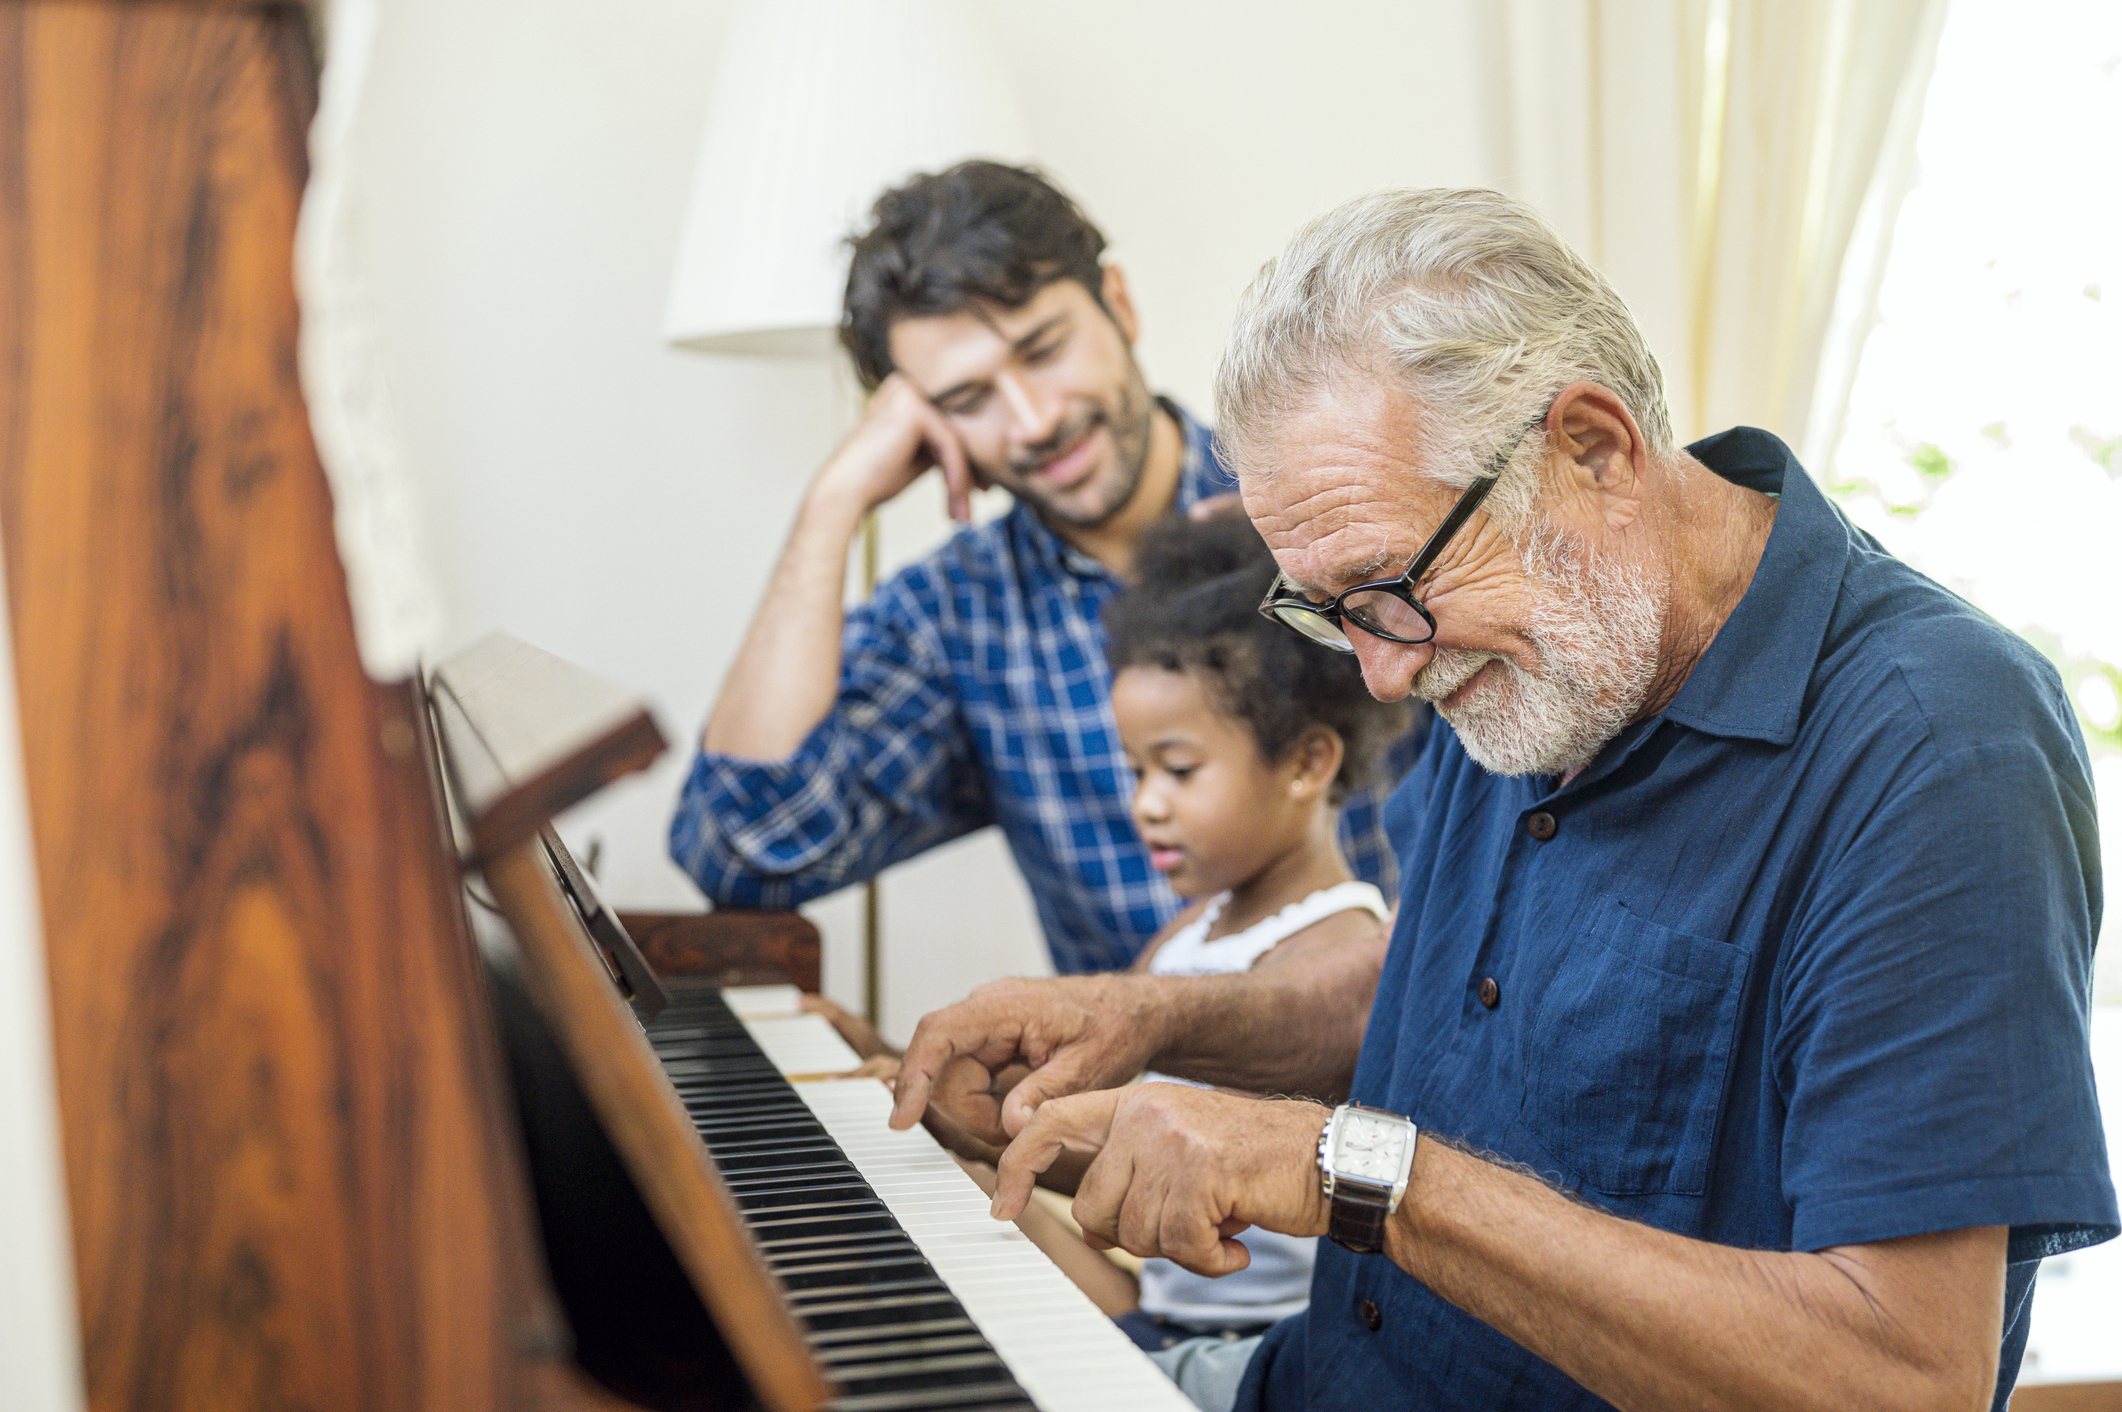 Family spend time happy together. Grandfather playing piano with his granddaughter and son together in living room at home.